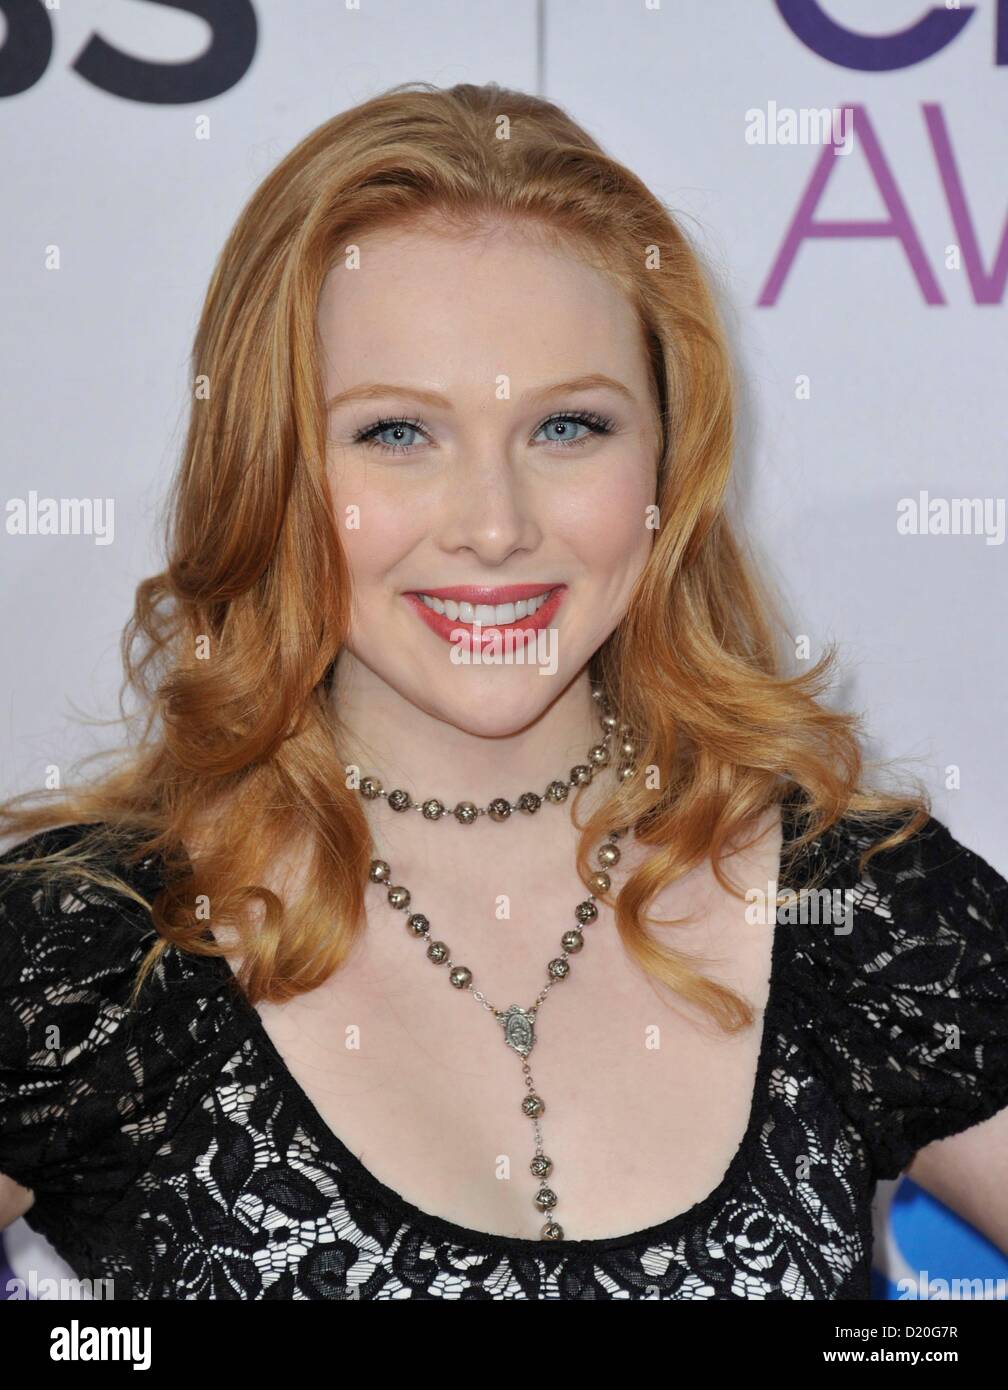 Molly C. Quinn at arrivals for The 39th Annual People's Choice Awards - ARRIVALS, Nokia Theatre at L.A. LIVE, Los Angeles, CA January 9, 2013. Photo By: Dee Cercone/Everett Collection Stock Photo